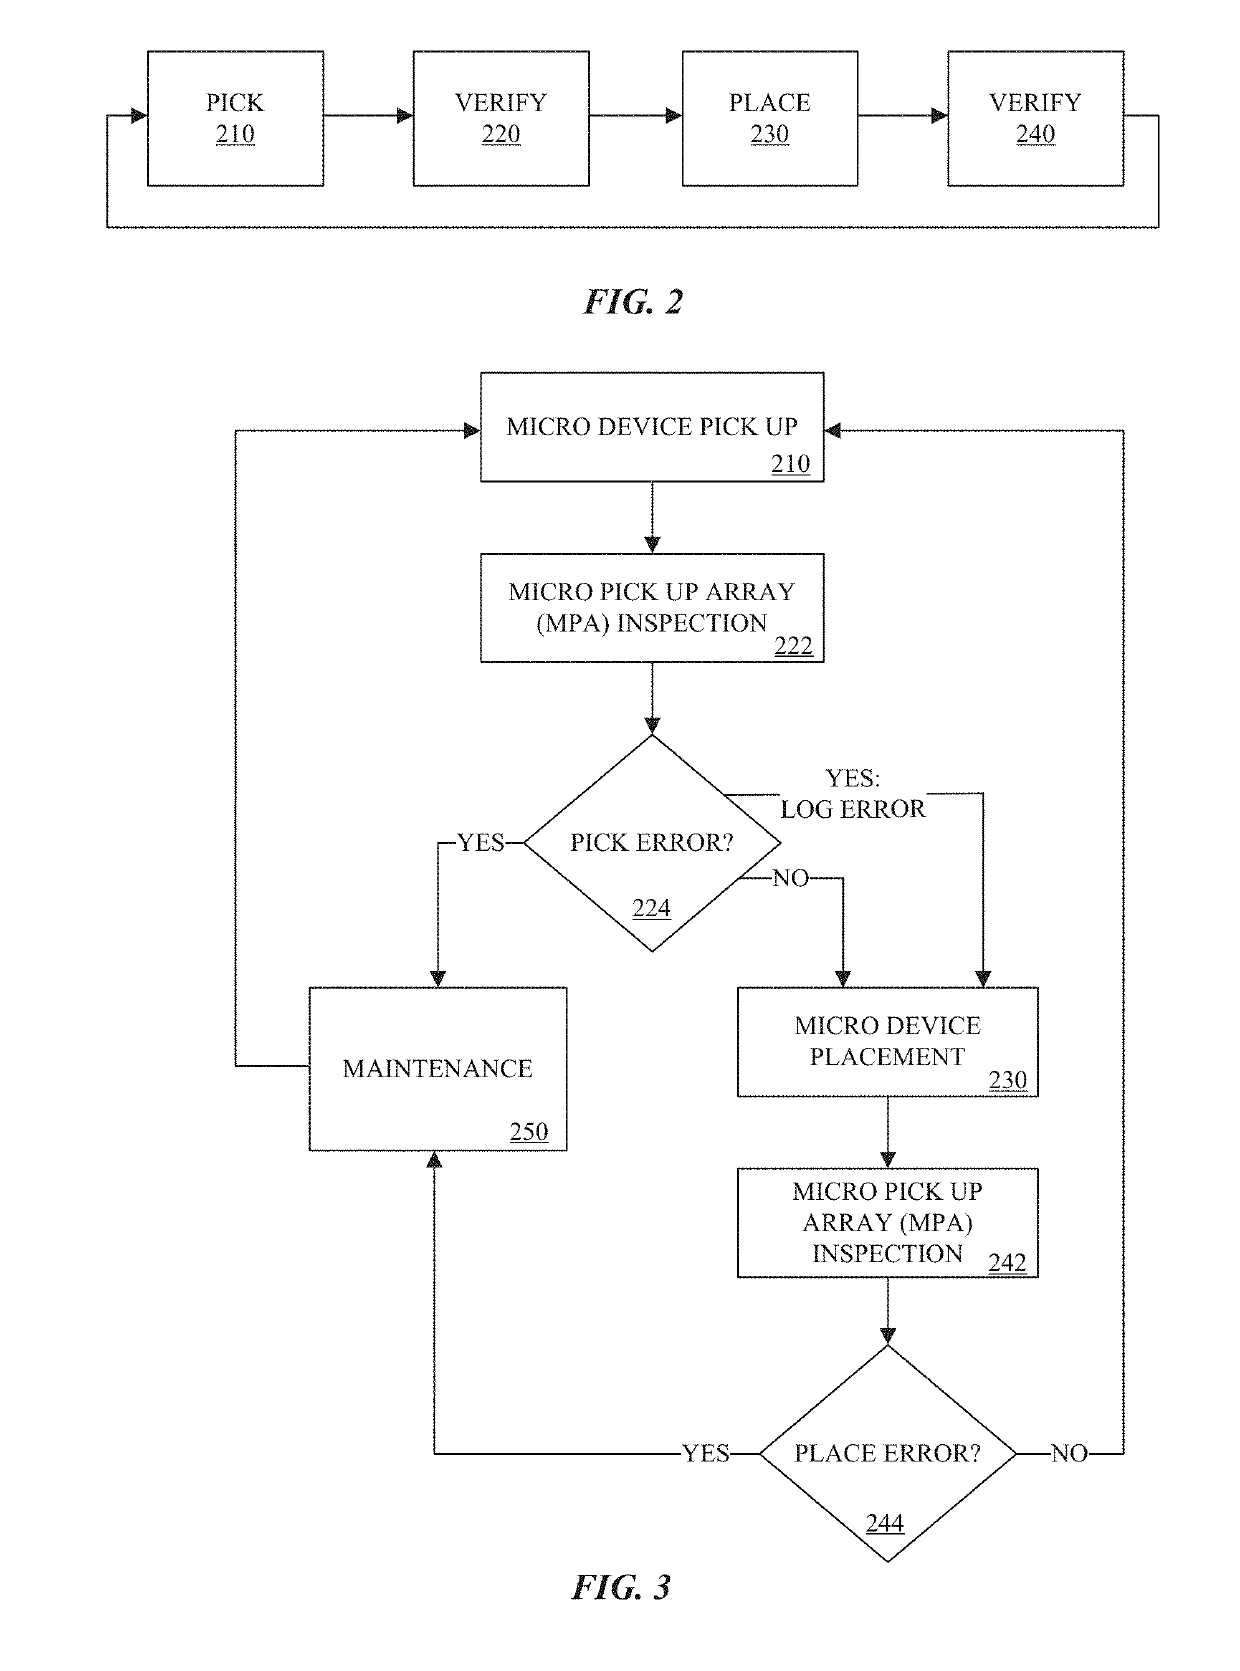 Optical verification system and methods of verifying micro device transfer